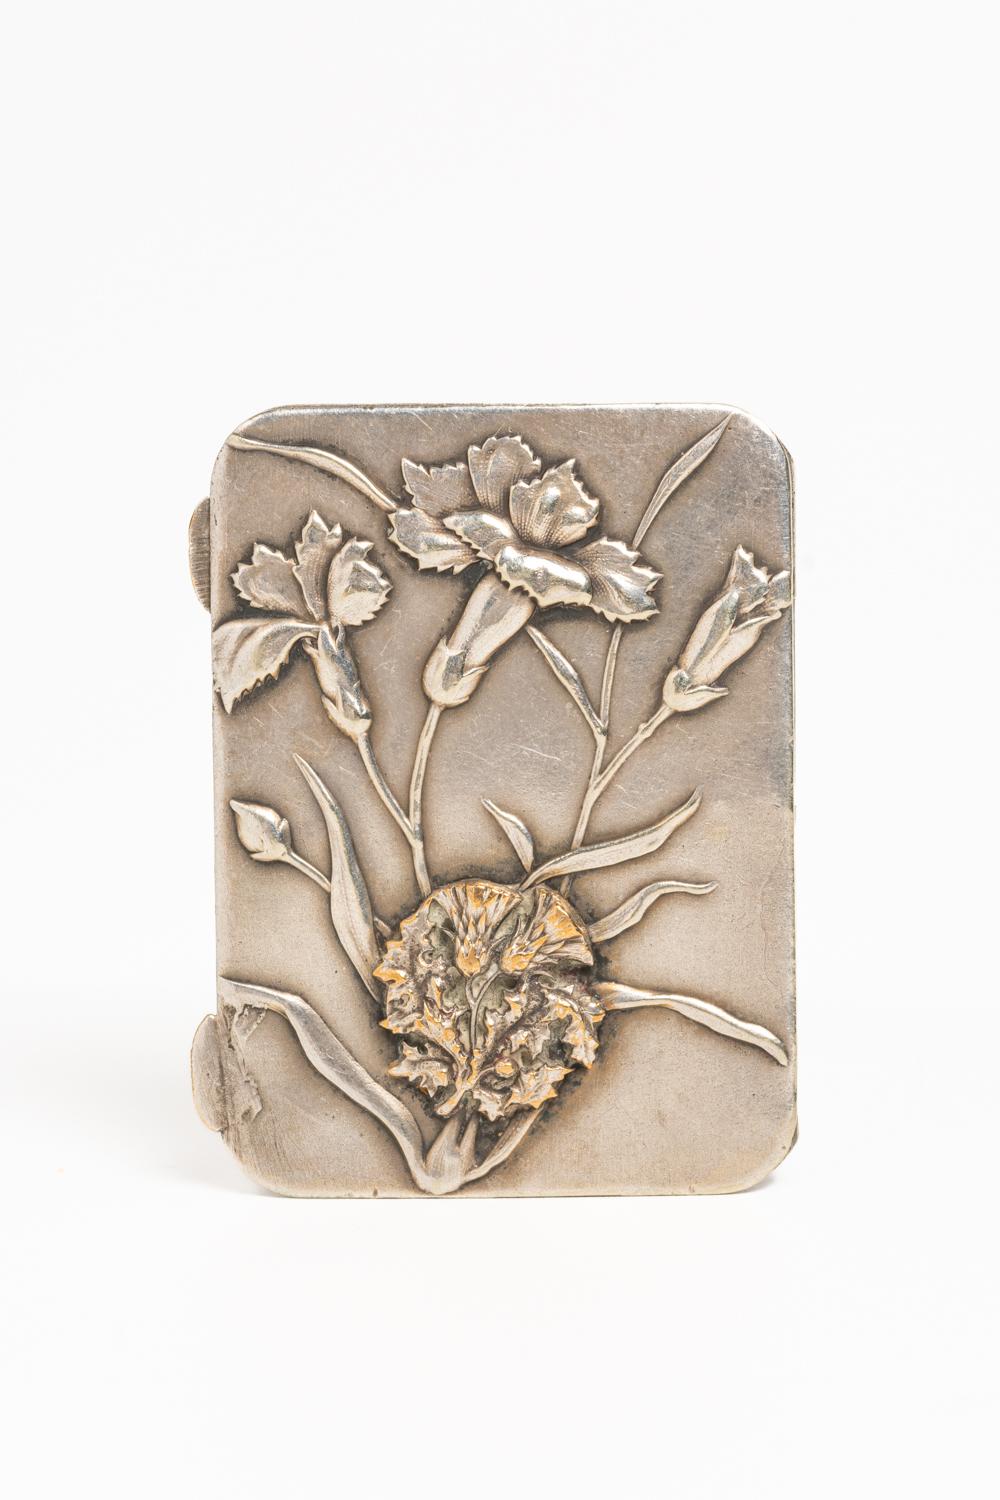 This charming French Art Nouveau pill box is dated circa 1890 and it's beautifully decorated with repousse Iris flowers and thistle on the bottom. The interior of the box is gilt washed and contains two compartments for pills. In many cultures, the